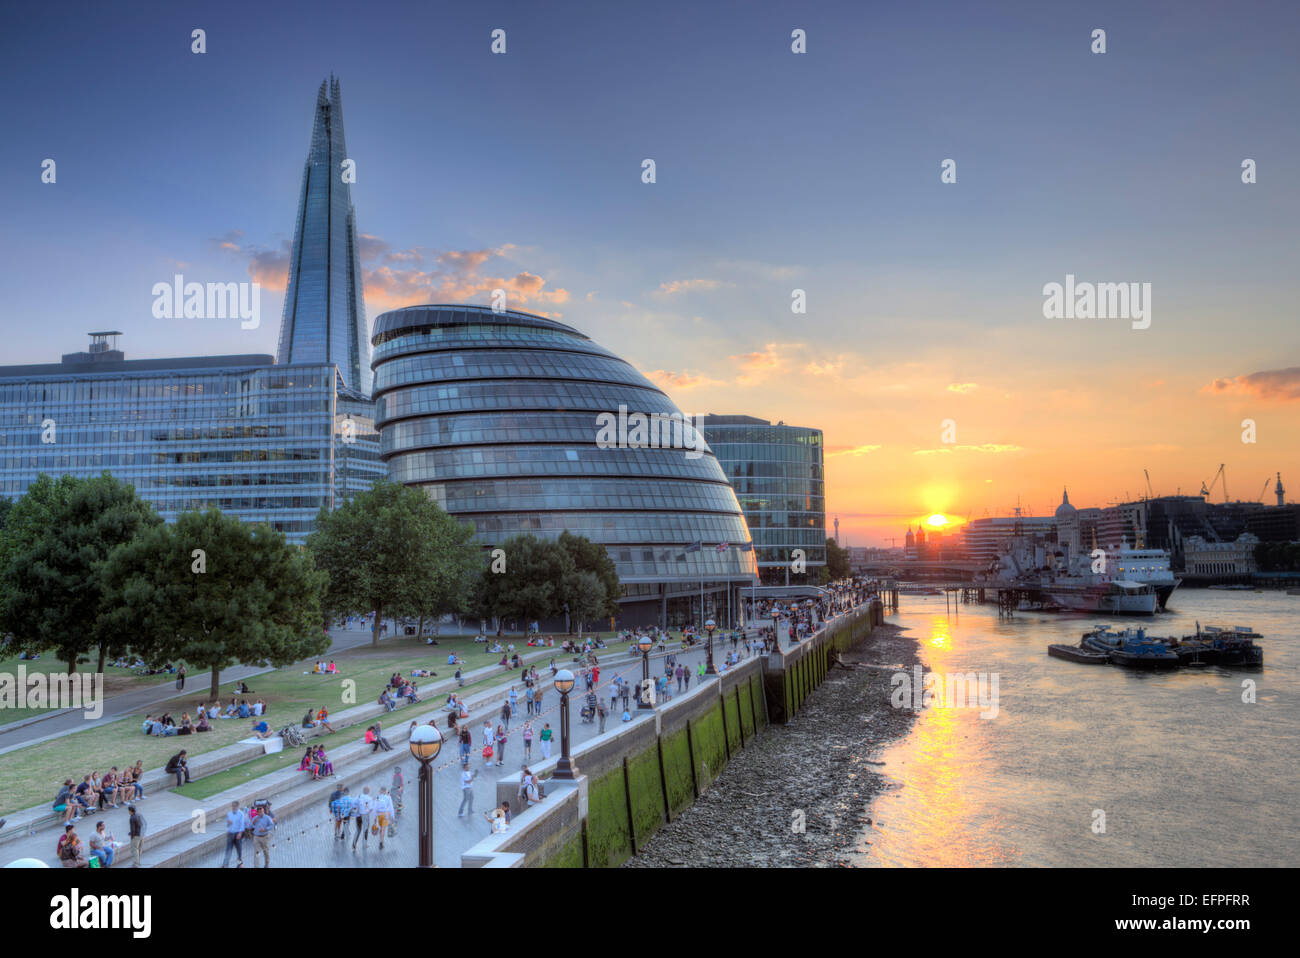 View of City Hall and the Shard on the south bank of the River Thames at sunset, London, England, United Kingdom, Europe Stock Photo